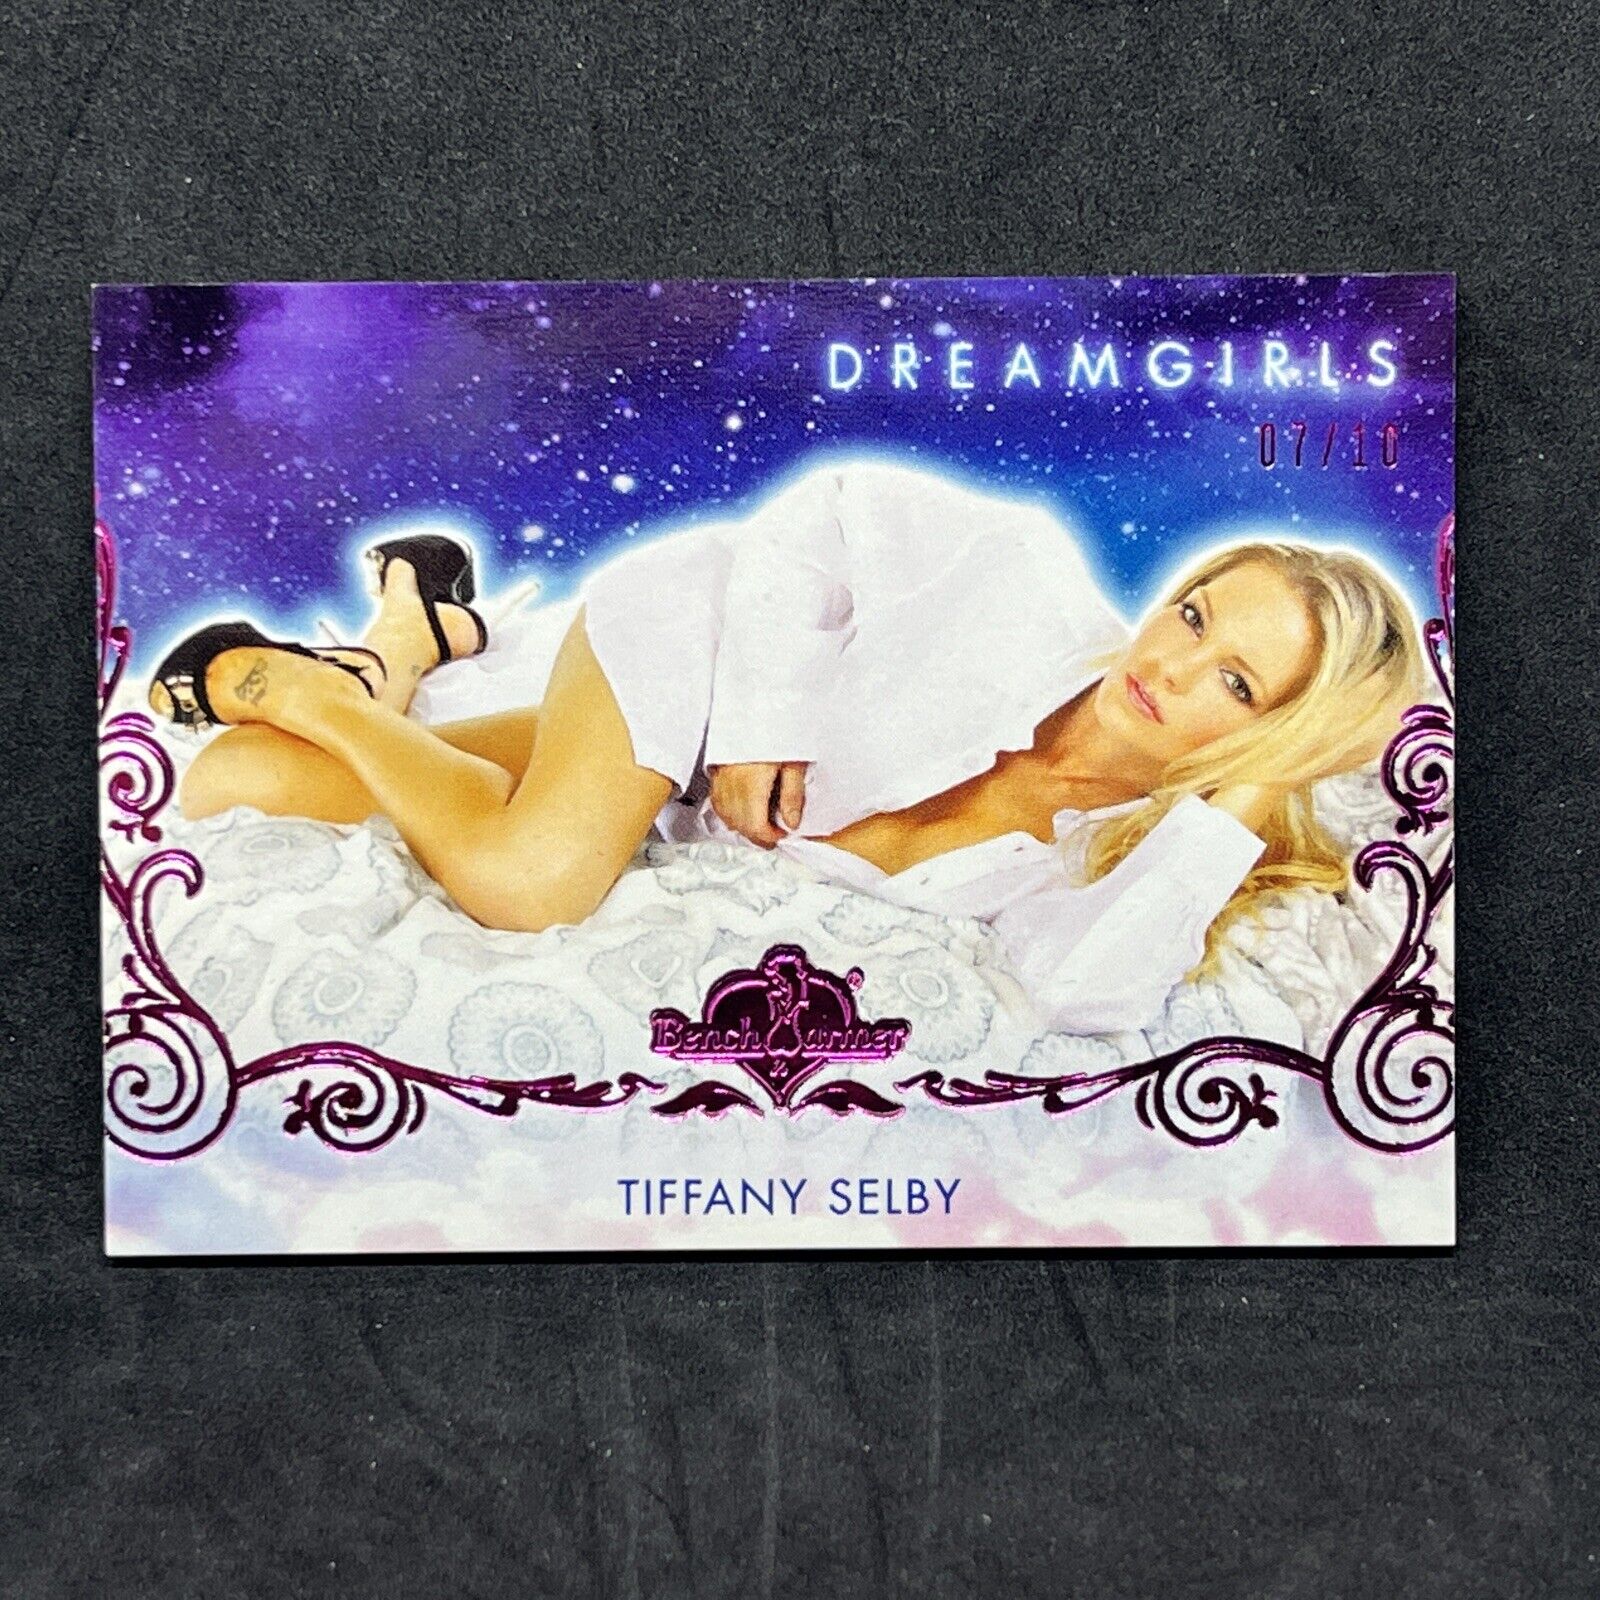 TIFFANY SELBY Benchwarmer Update Dream Girls #98 Pink Foil 07/10